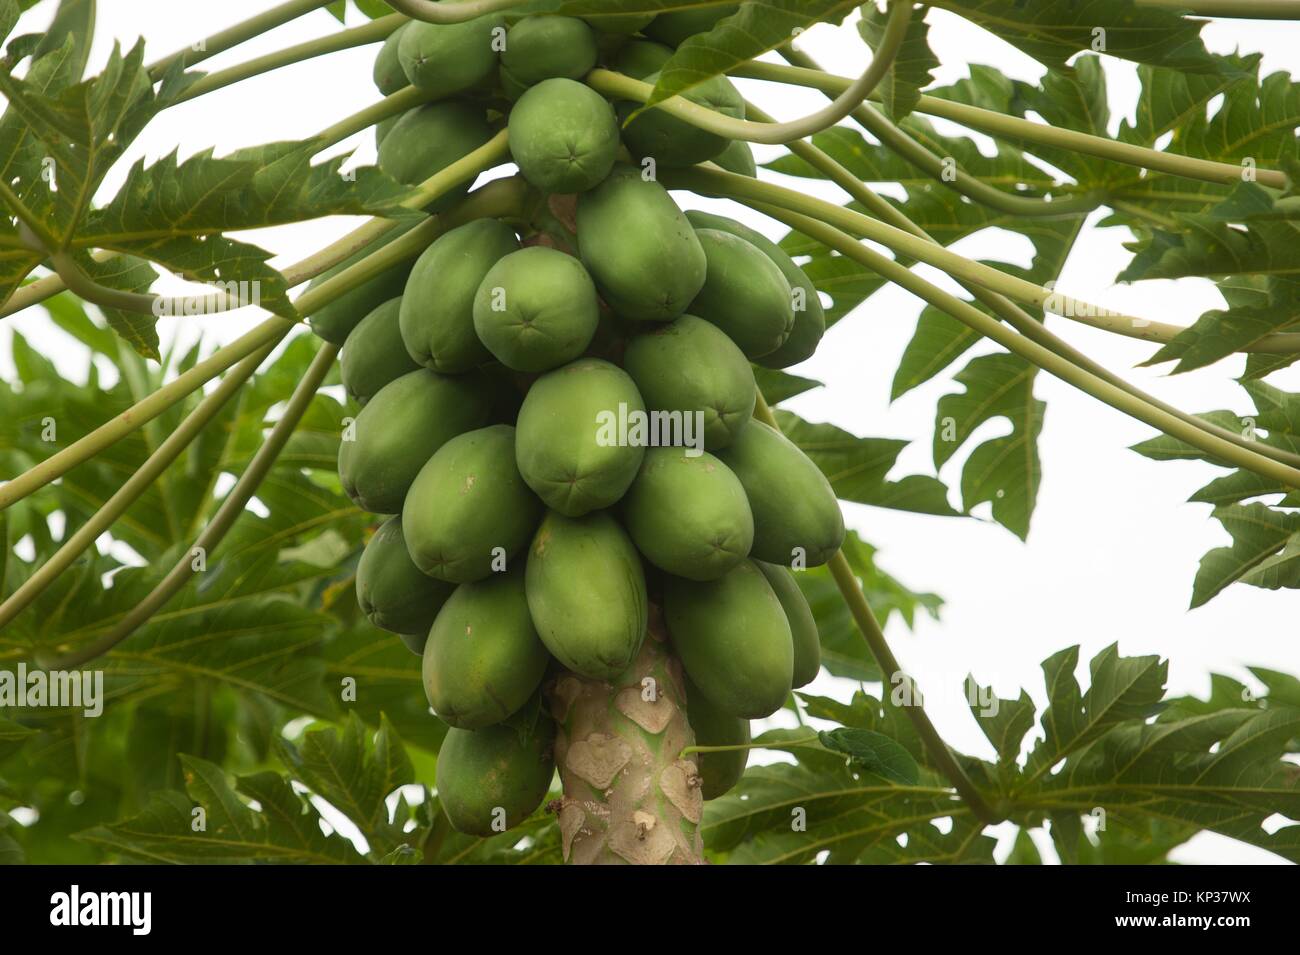 Paw-paw crop ripening on the tree. Paw Paw, Paw paw, or pawpaw may refer to:.Contents [hide]. 1Plants and fruits. 2Places. 3See also. Plants and Stock Photo